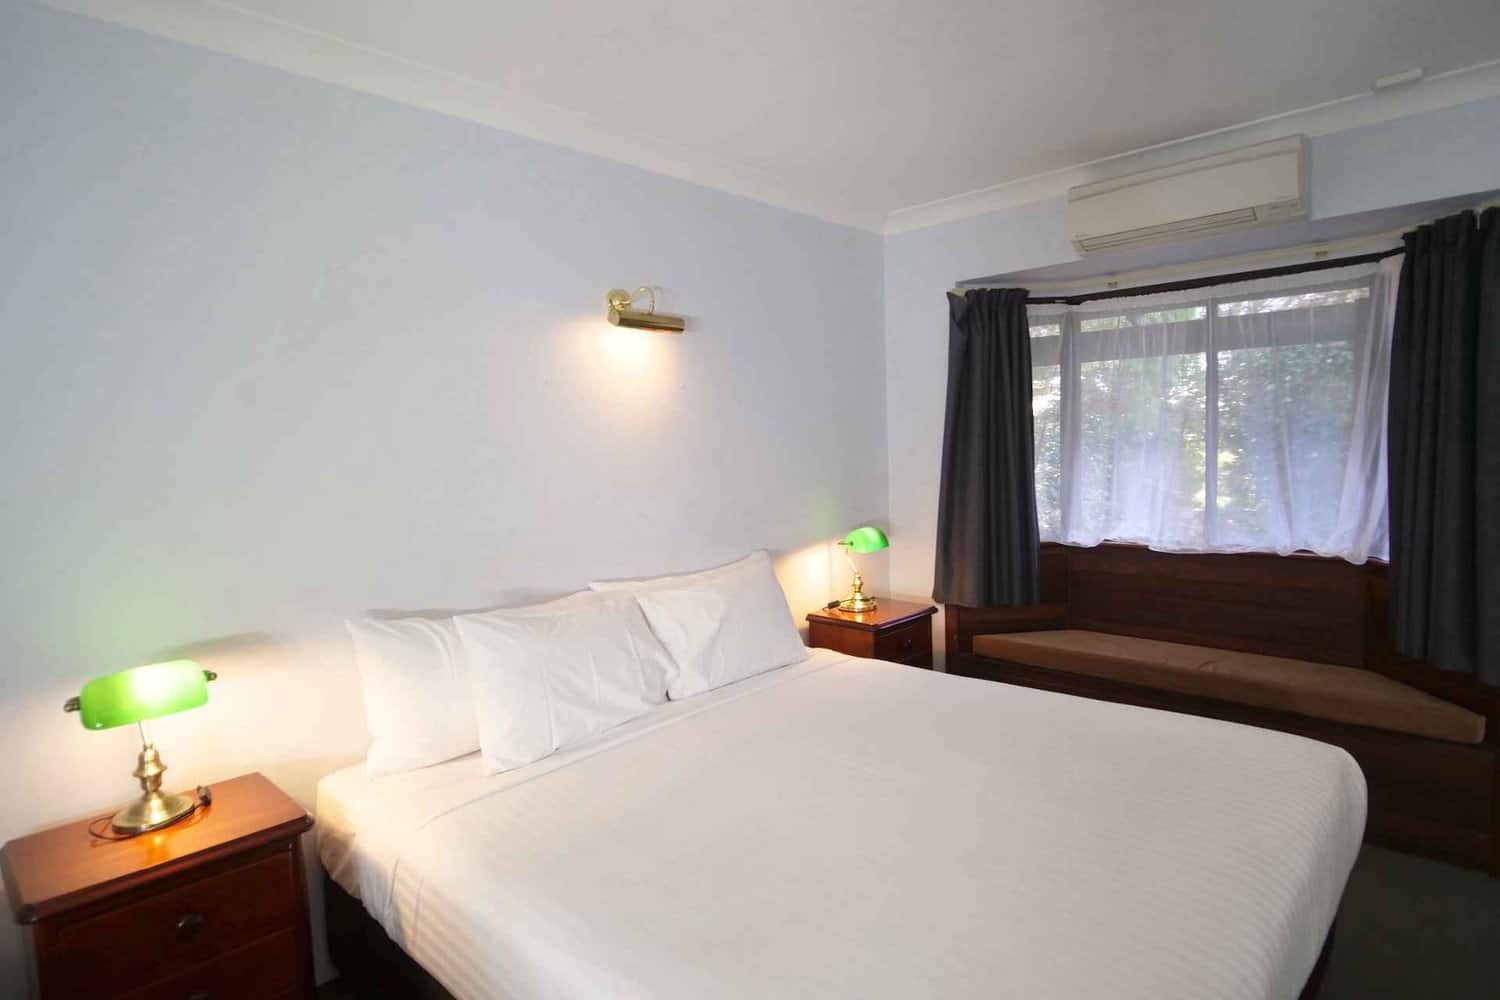 Inviting king size bed in a hotel room, complete with bedside lamps and a window offering natural light, as guests ponder the duration of their stay in such a comfortable and welcoming environment